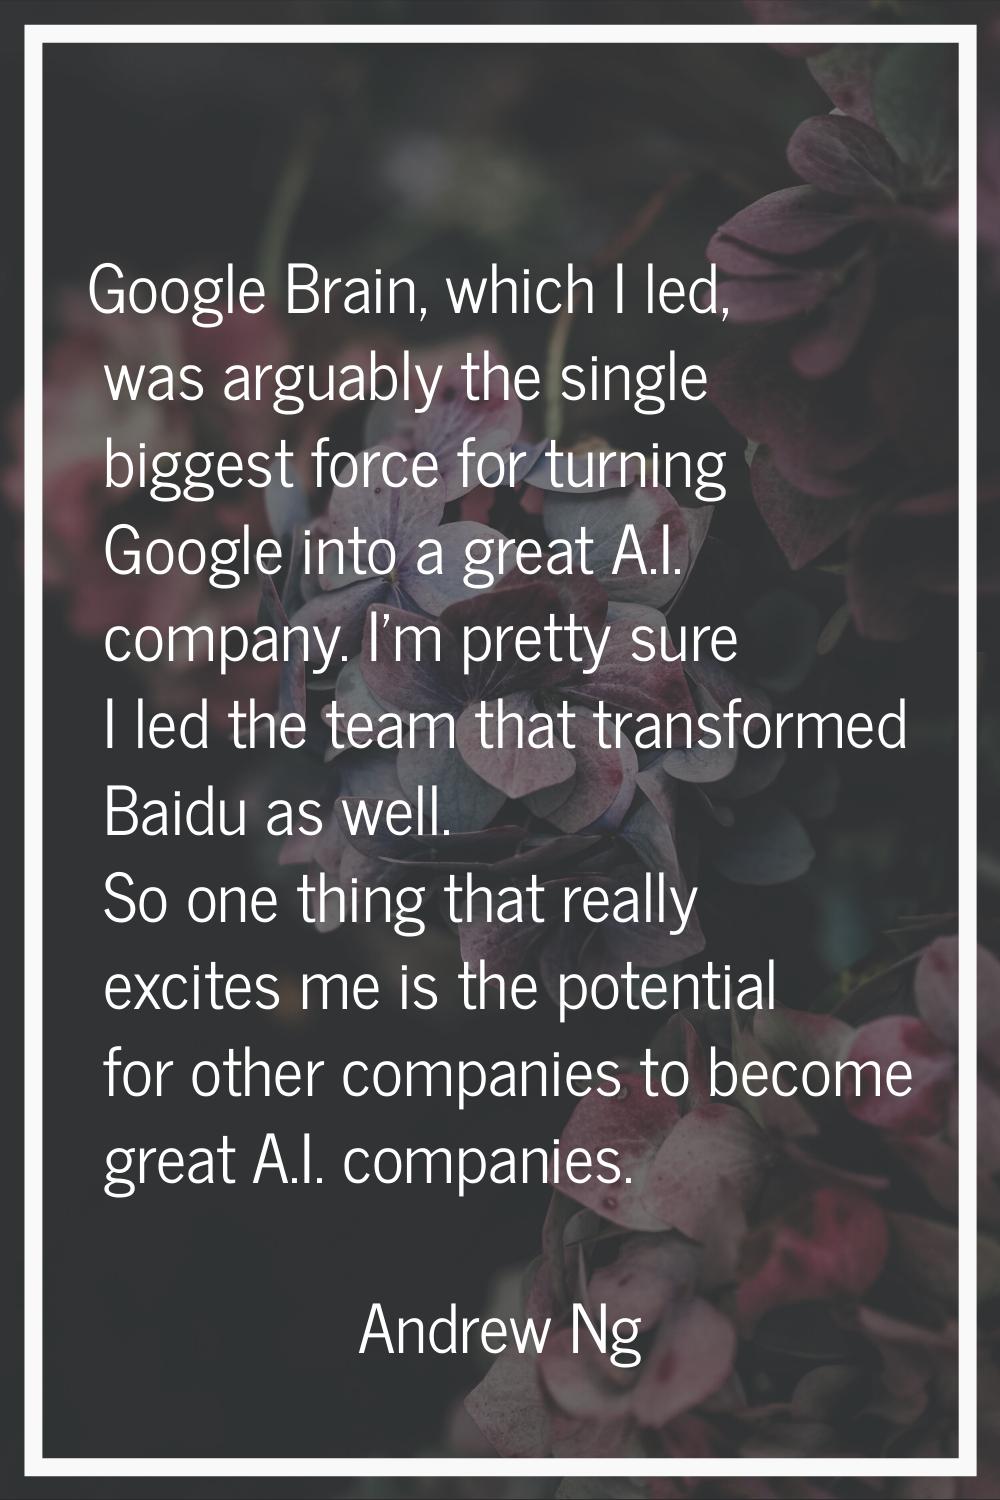 Google Brain, which I led, was arguably the single biggest force for turning Google into a great A.